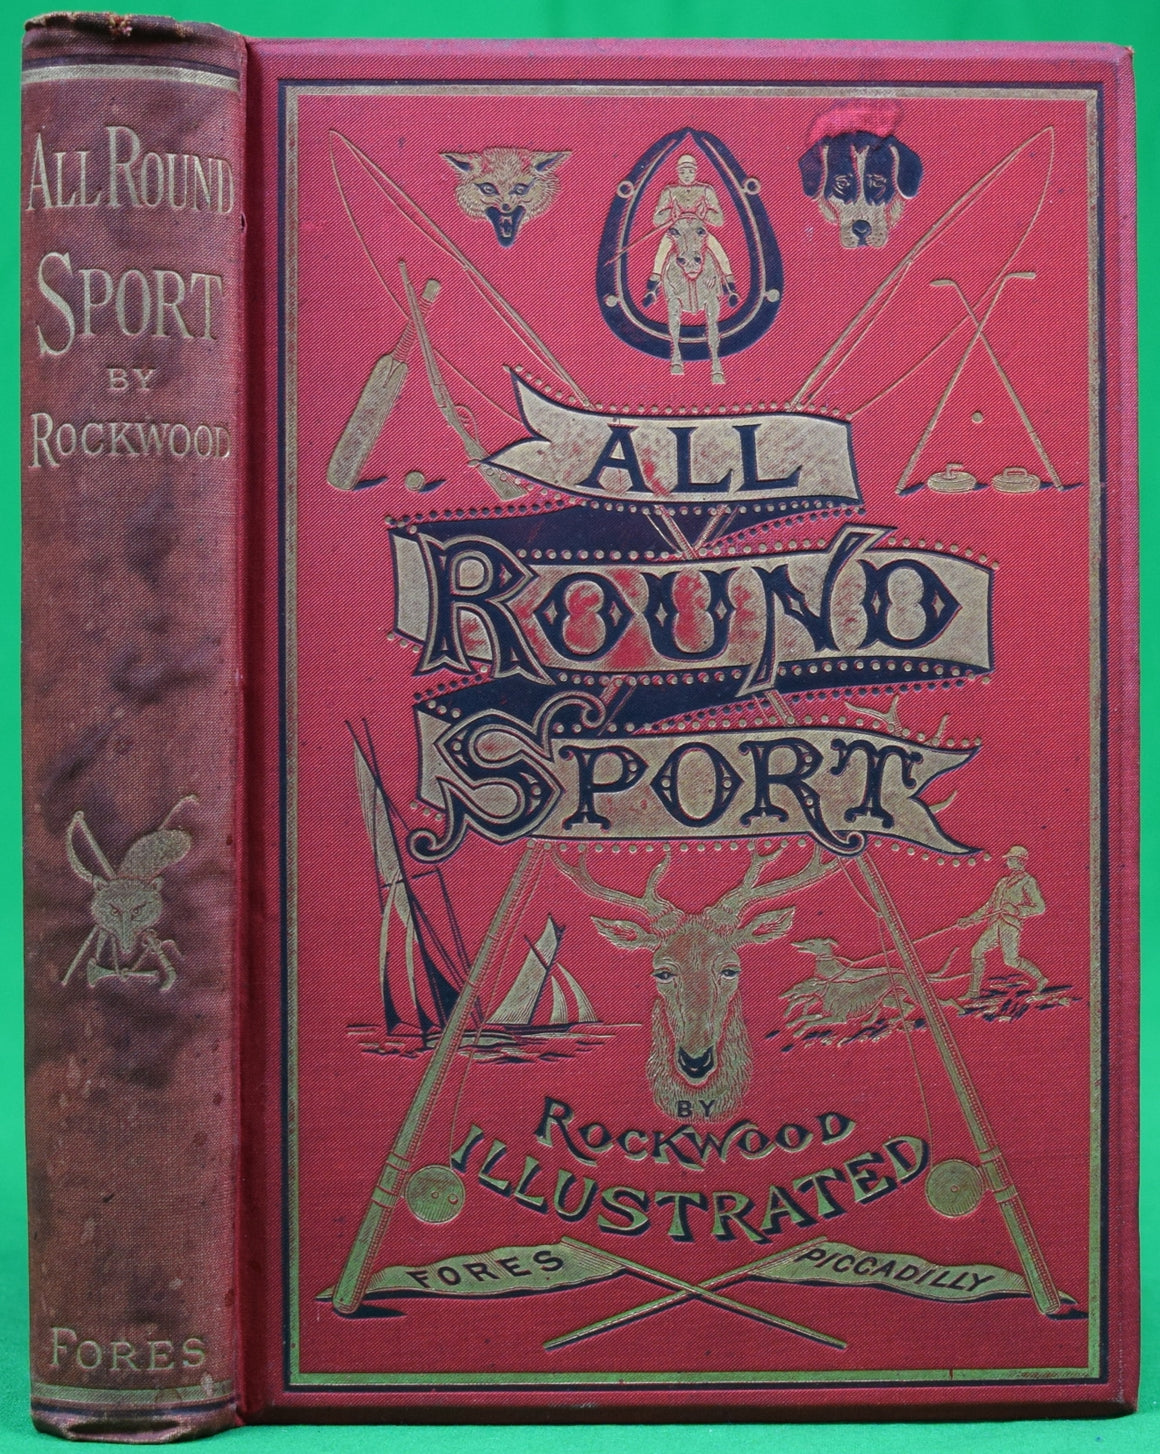 "All Round Sport With Fish, Fur & Feather" 1887 DYKES, T. ("ROCKWOOD")